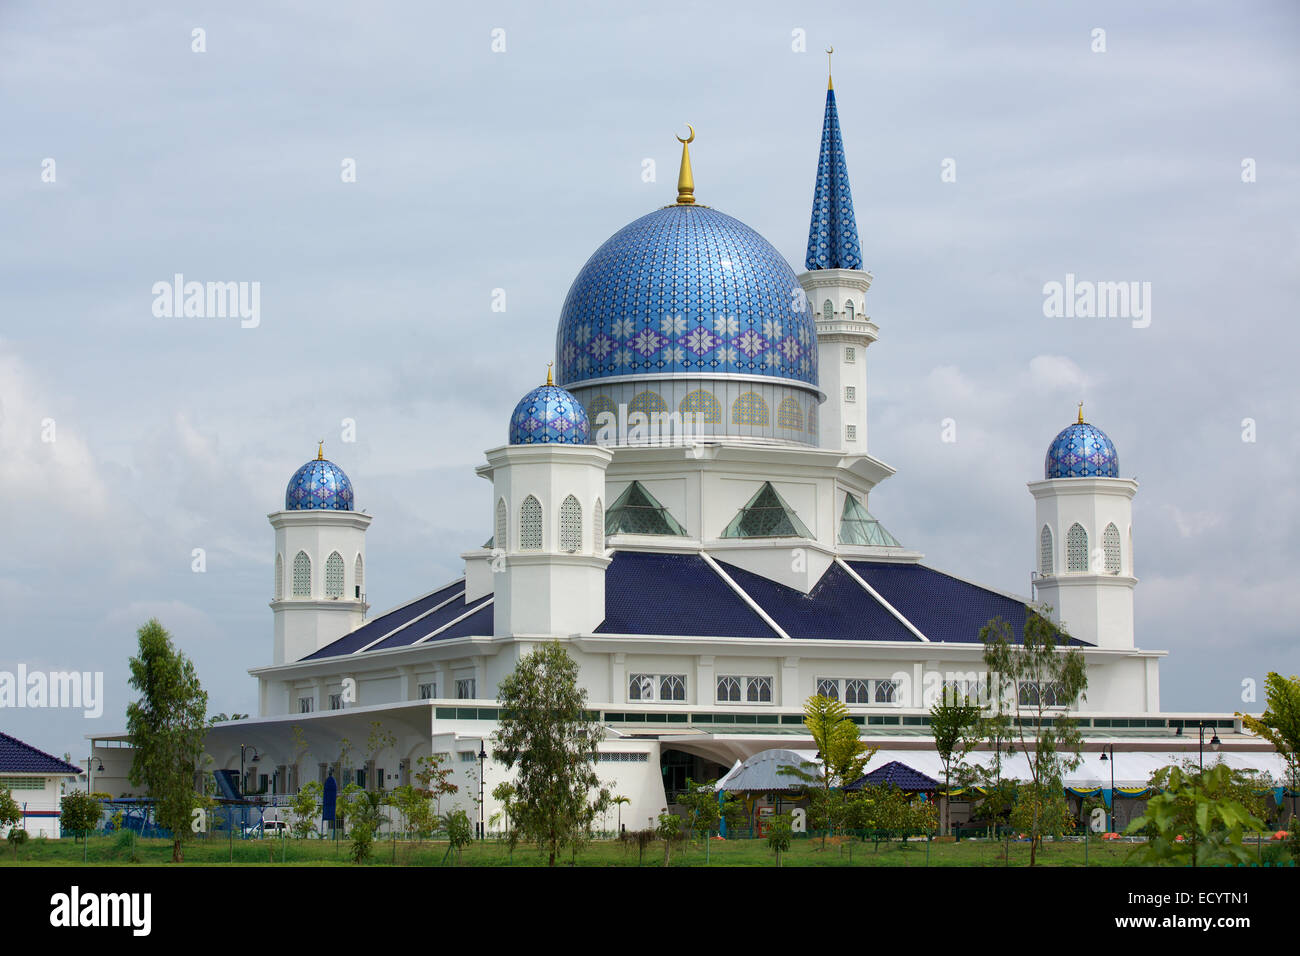 The grand Mosque at Kepala Batas in Penang state. Blue patterned dome and tall minaret adorn this impressive structure. Stock Photo